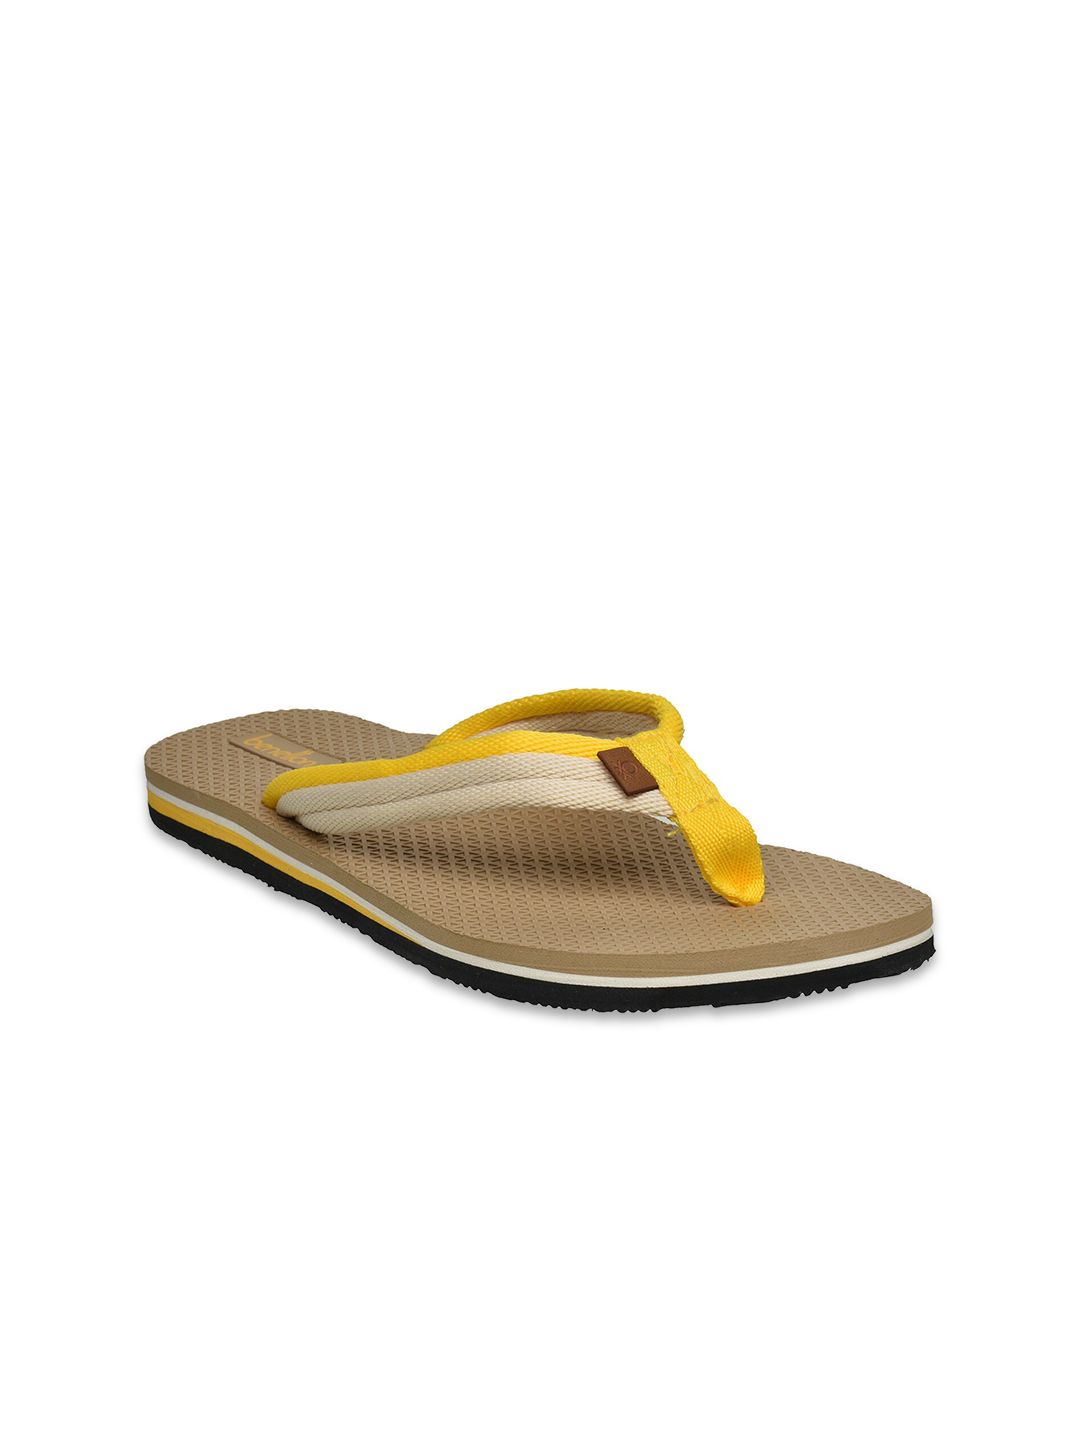 United Colors of Benetton Women Yellow & Beige Rubber Thong Flip-Flops Price in India